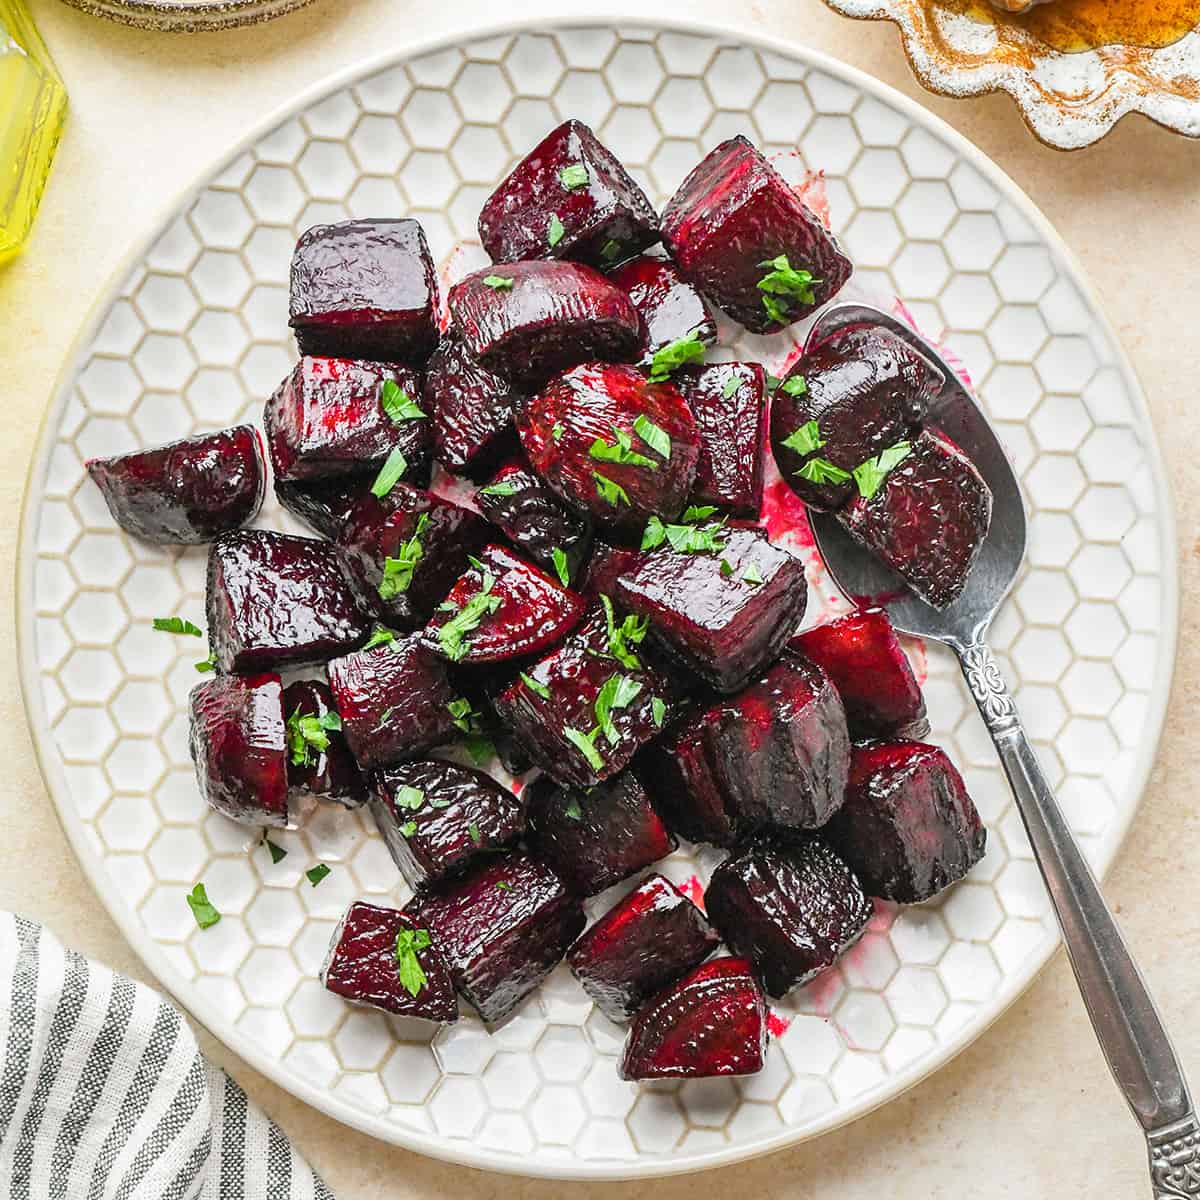 Oven Roasted Beets Recipe on a plate with a spoon garnished with greens